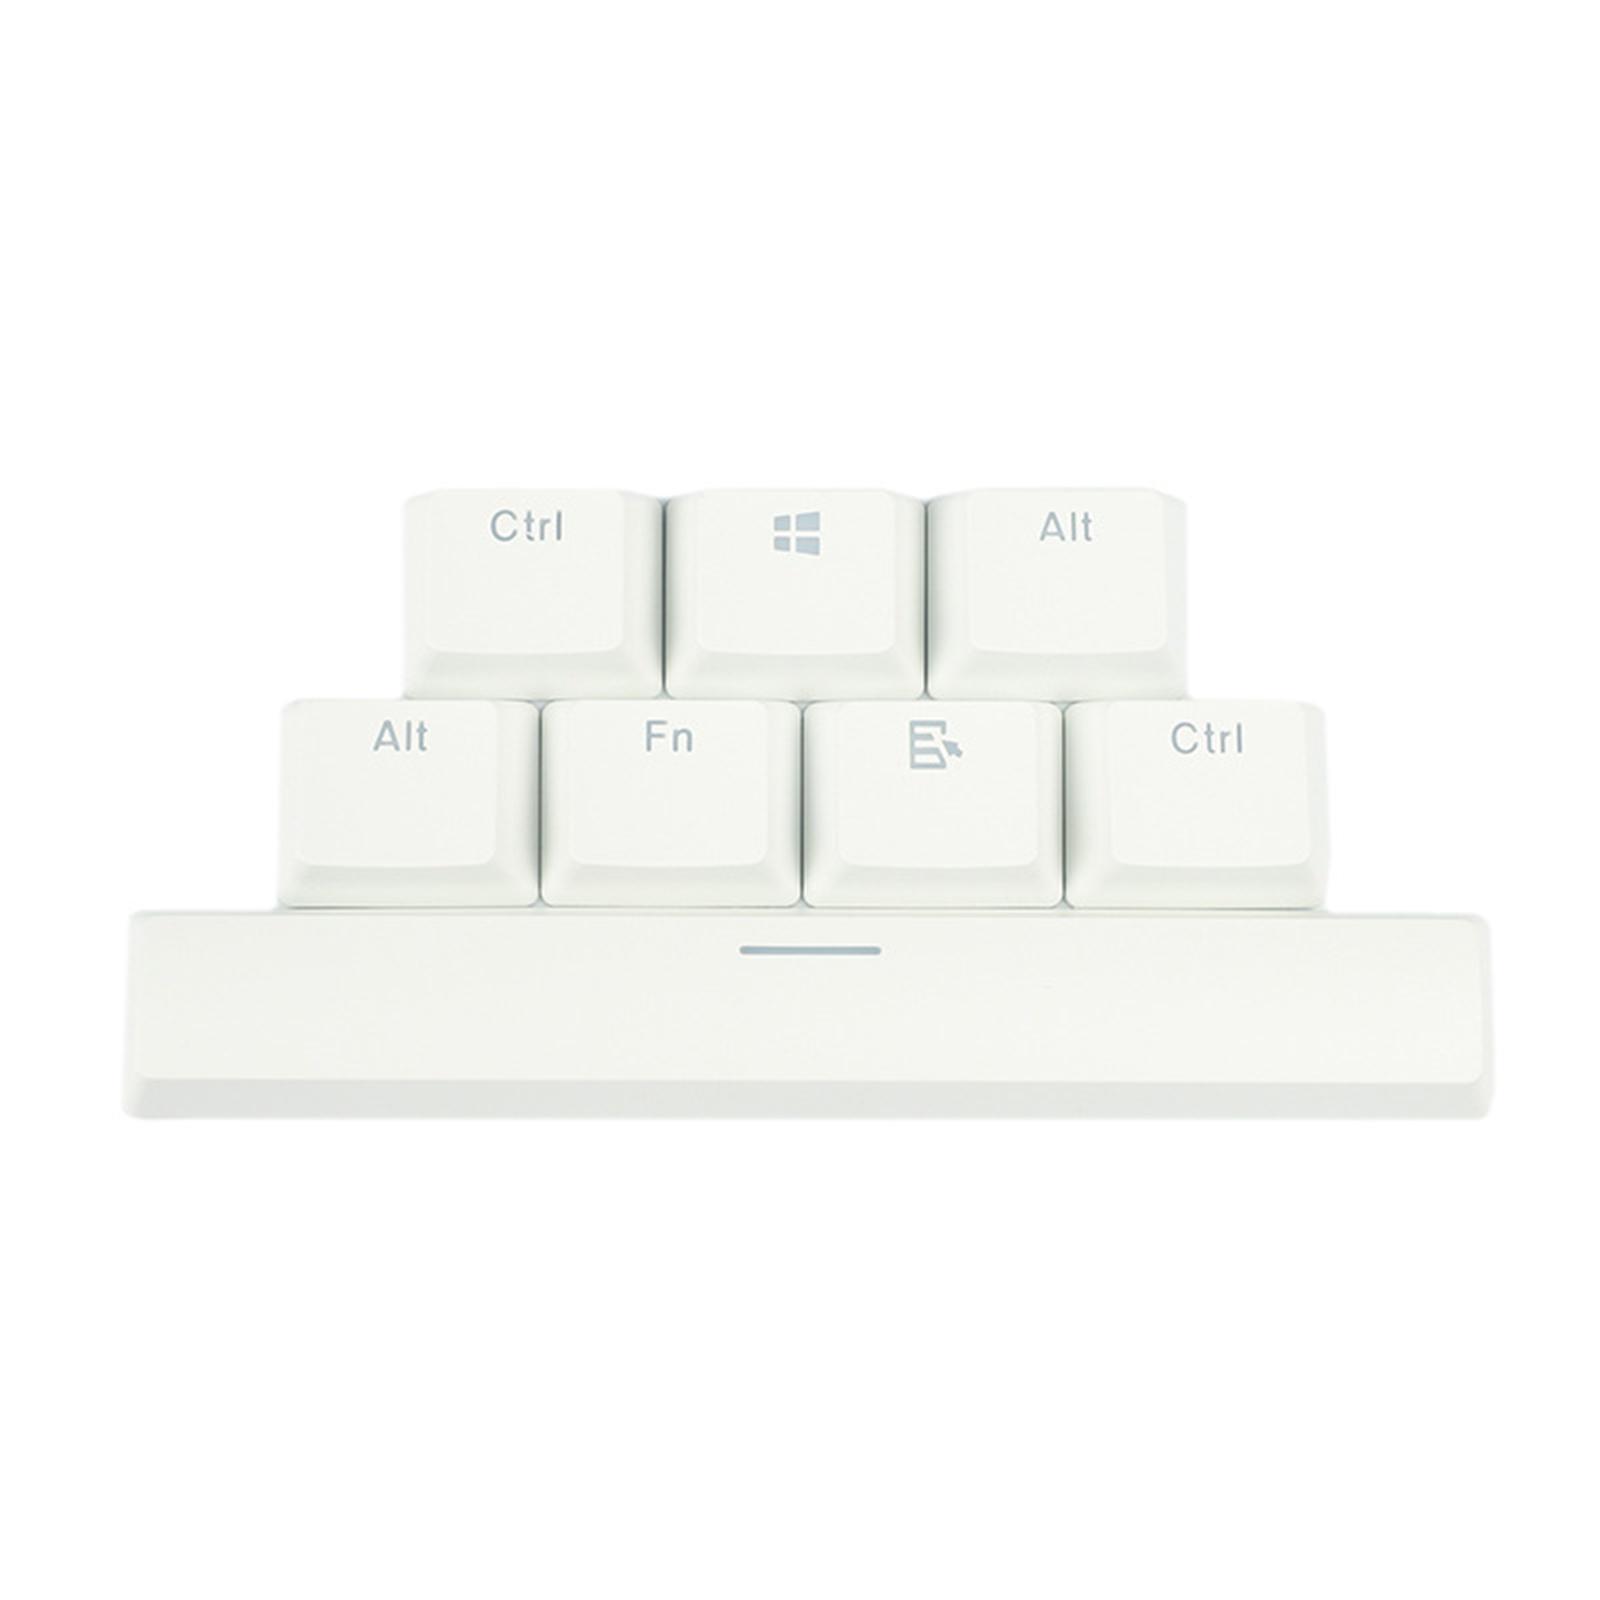 8 Pieces PBT Two-Color Translucent Keycaps for Mechanical Keyboard